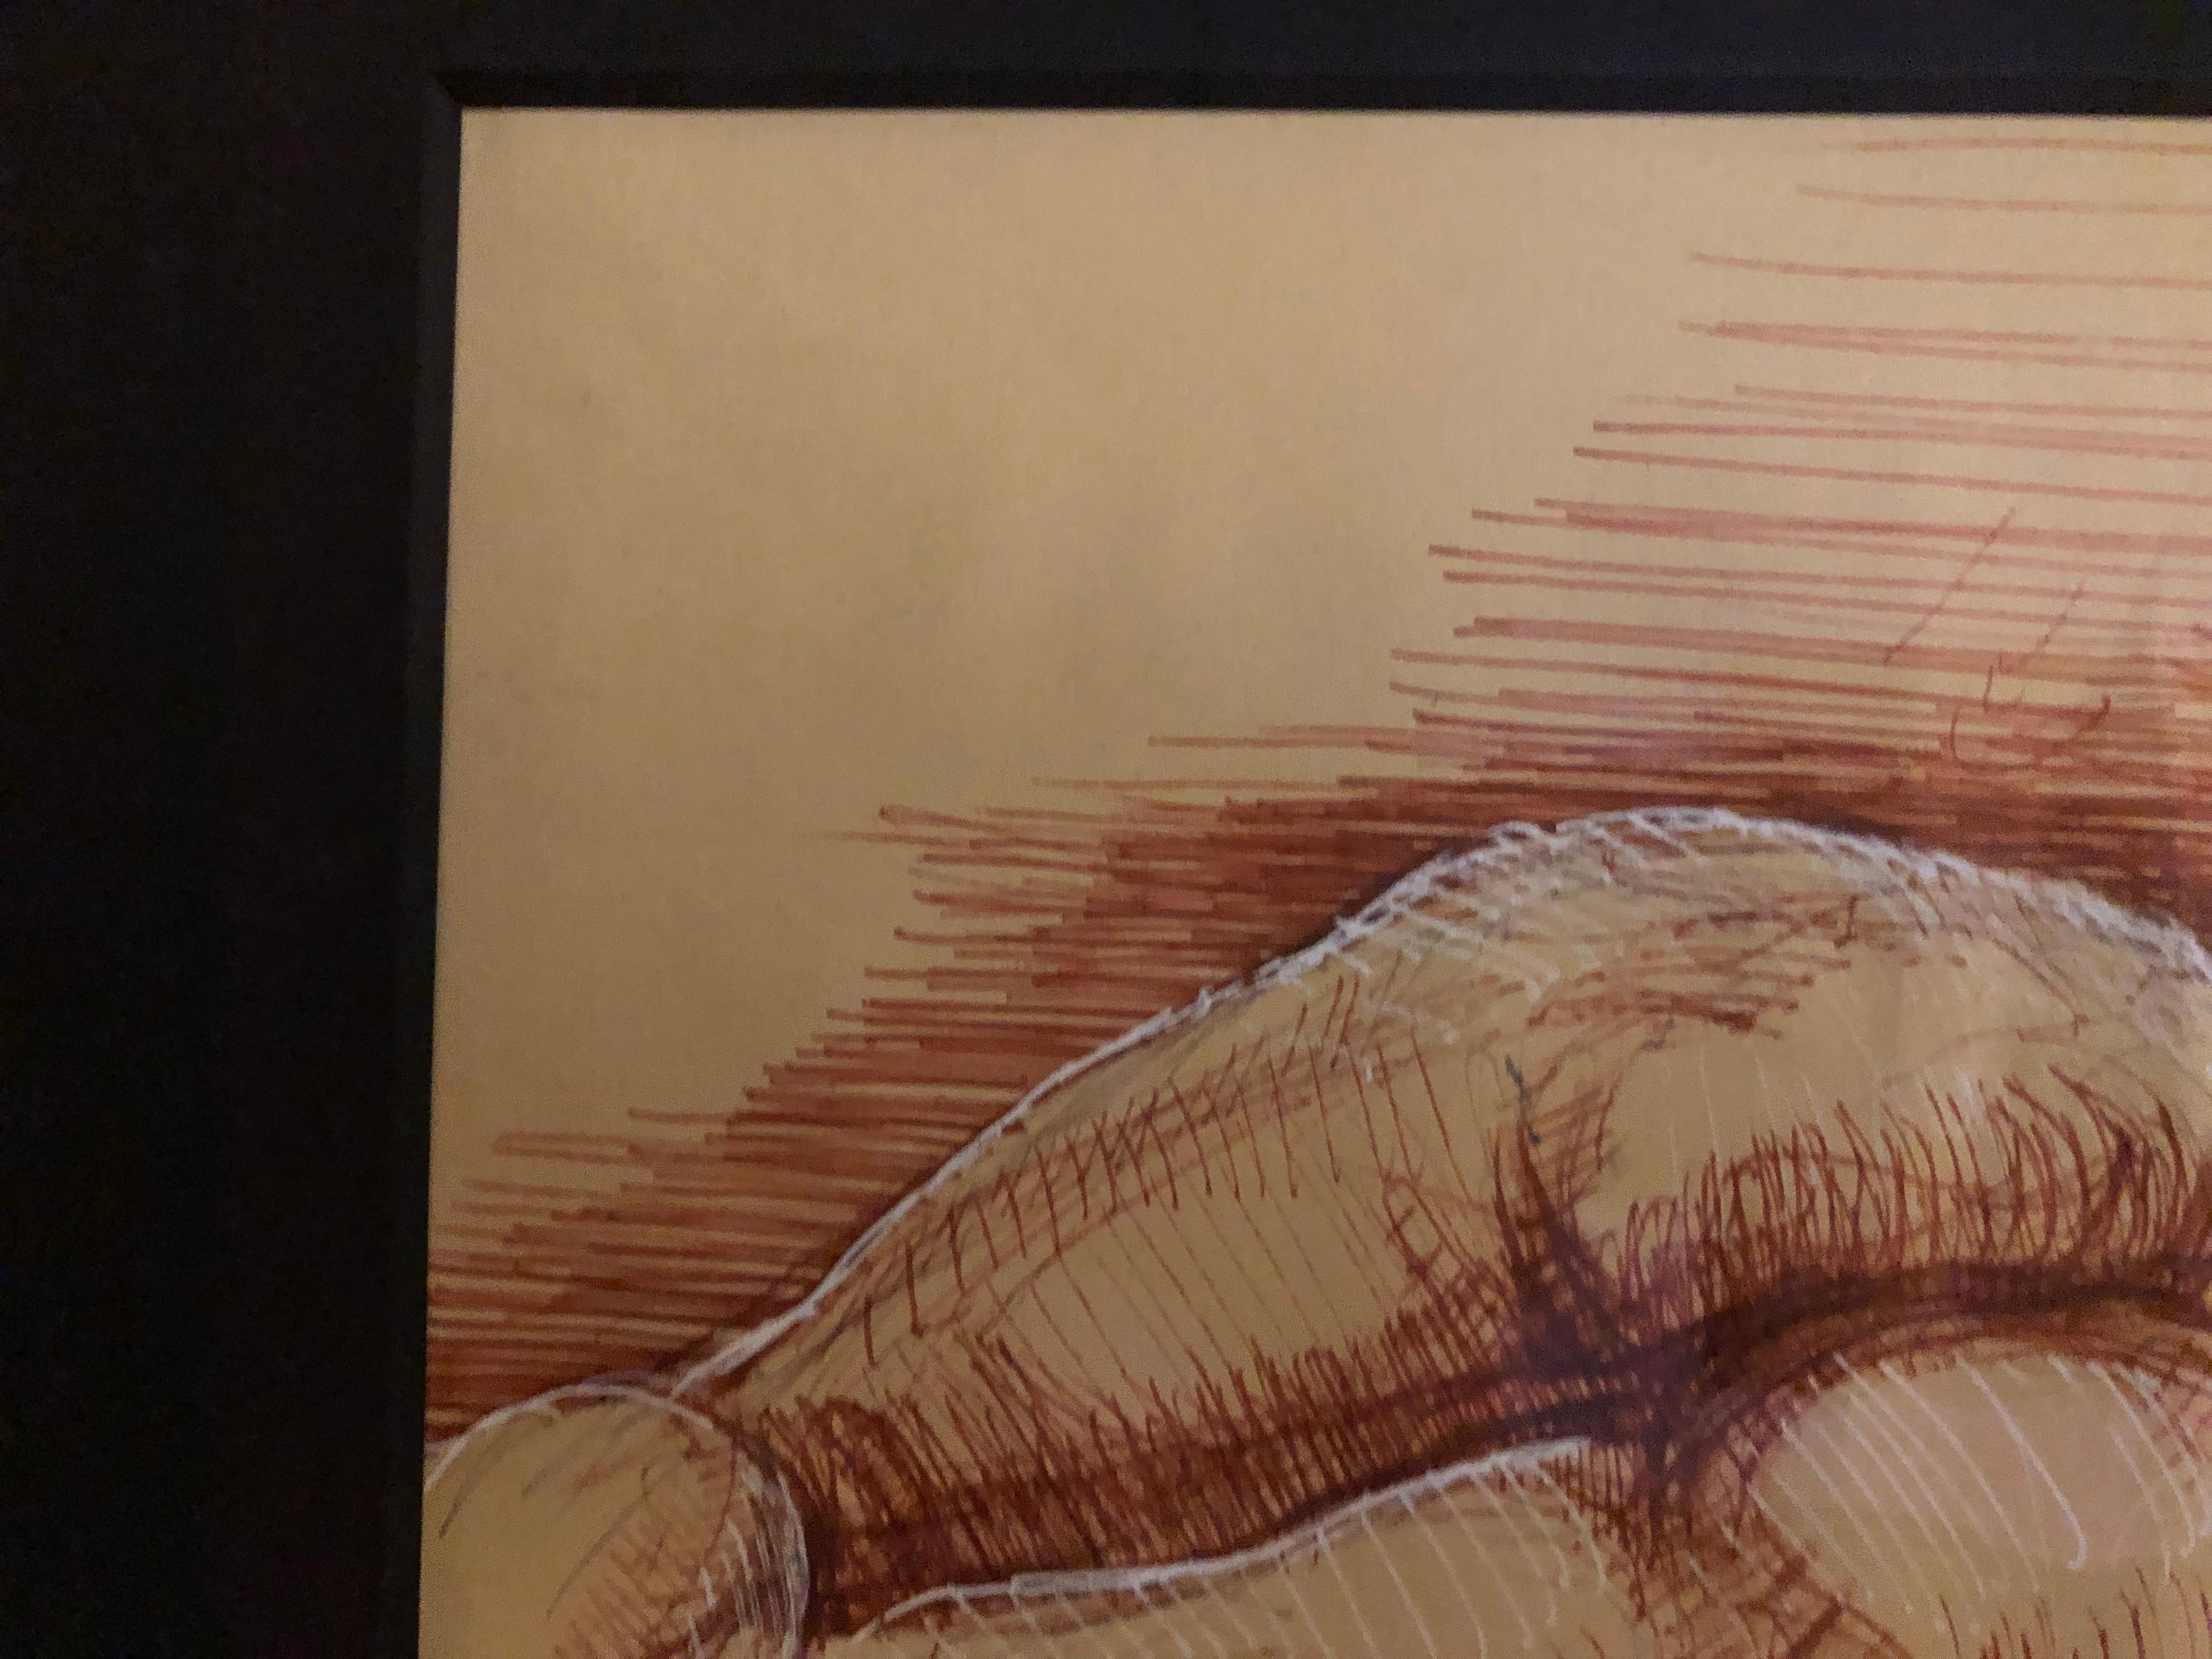 Sleeping Hermaphrodite, Female Nude, Pen Drawing after a Roman Sculpture - Contemporary Art by Christopher Ganz